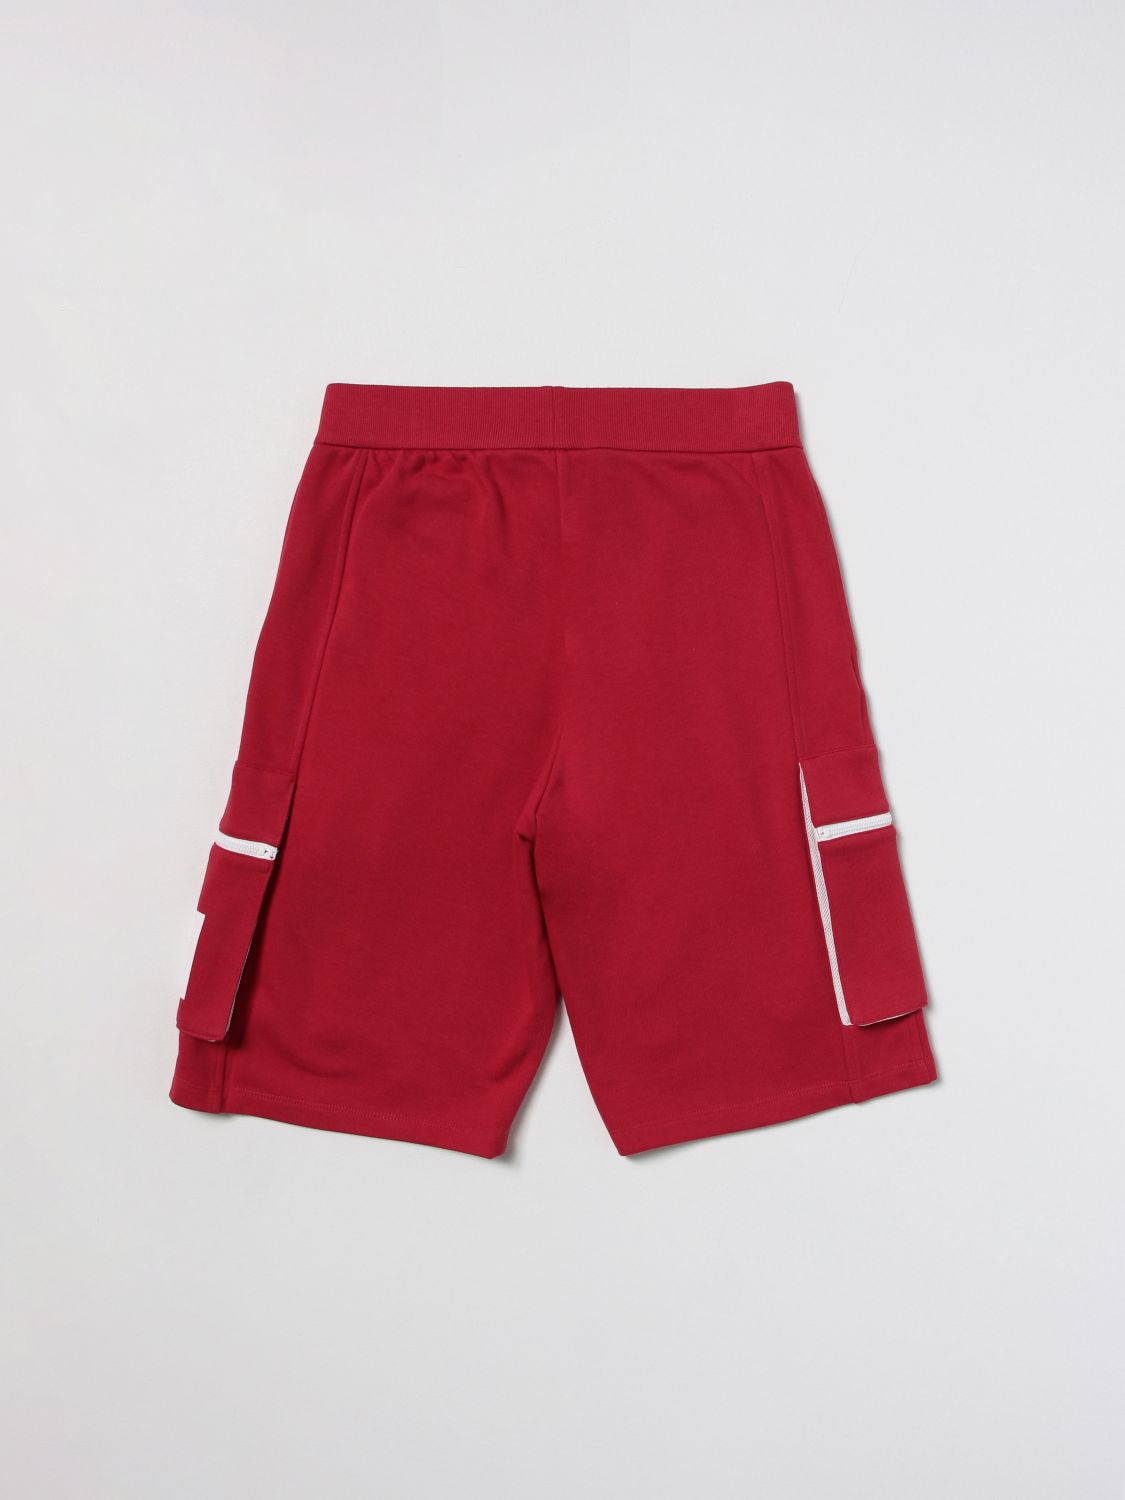 EMPORIO ARMANI KIDS: shorts for boys - Red | Emporio Armani Kids shorts  3R4SJ44J5RZ online on 